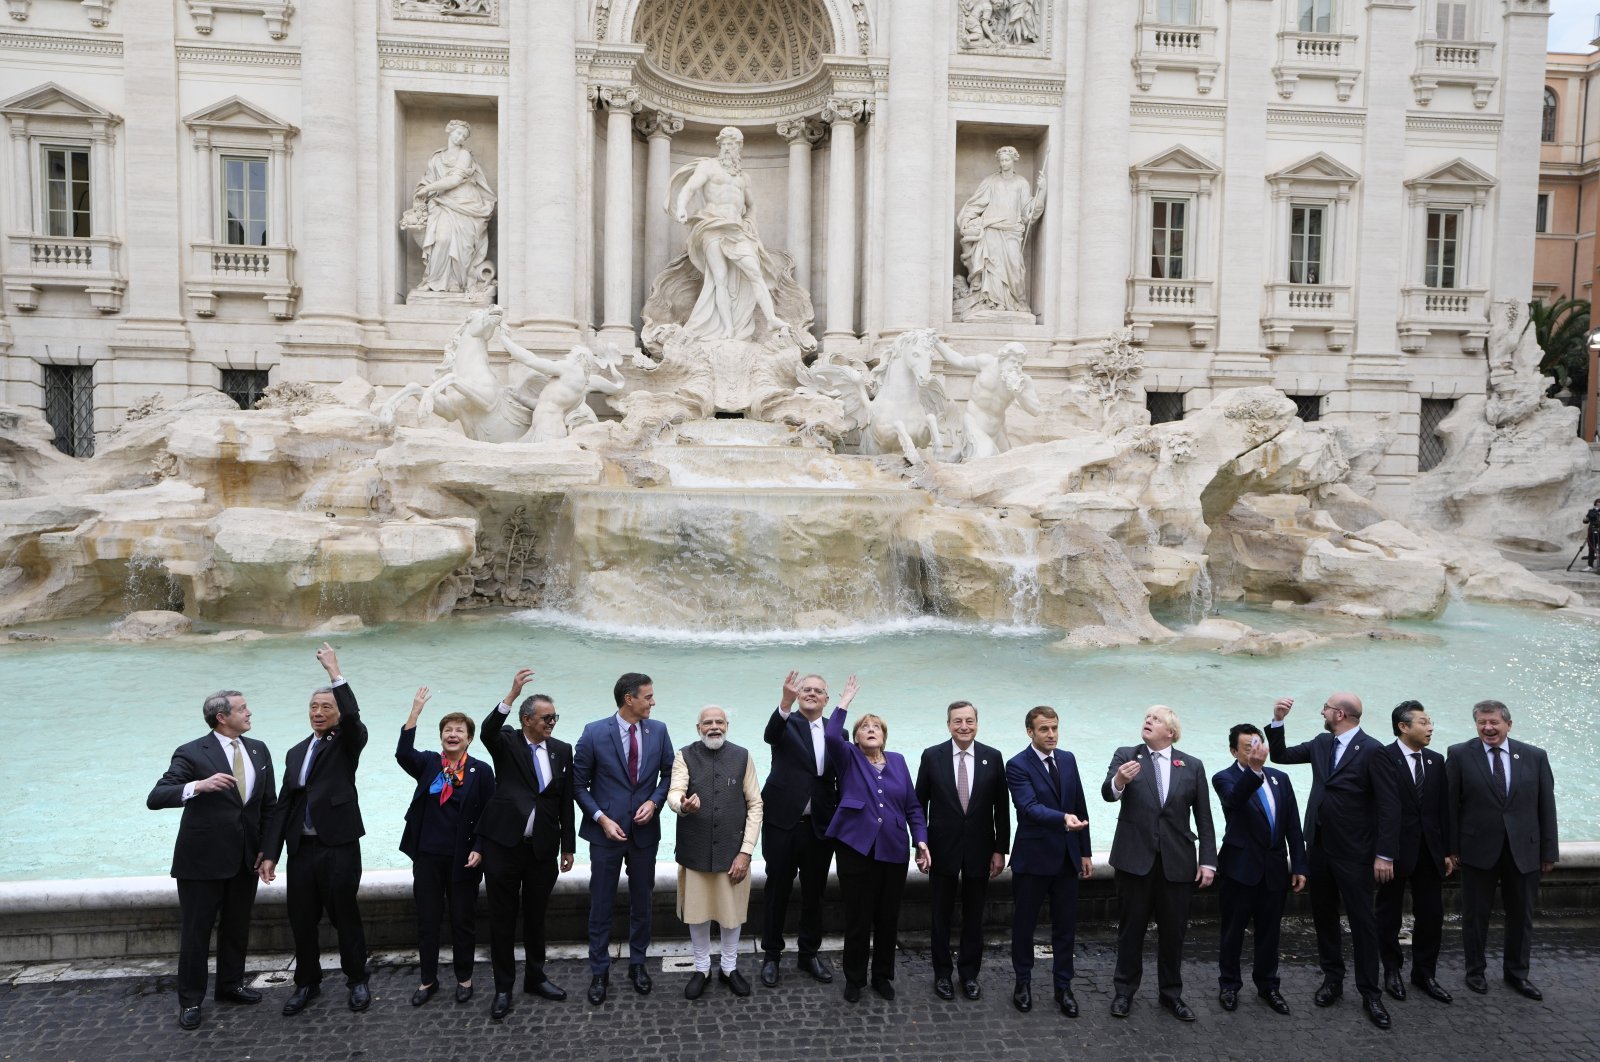 Leaders pose in front of the Trevi Fountain during the G-20 summit in Rome, Italy, Oct. 31, 2021. (AP Photo)